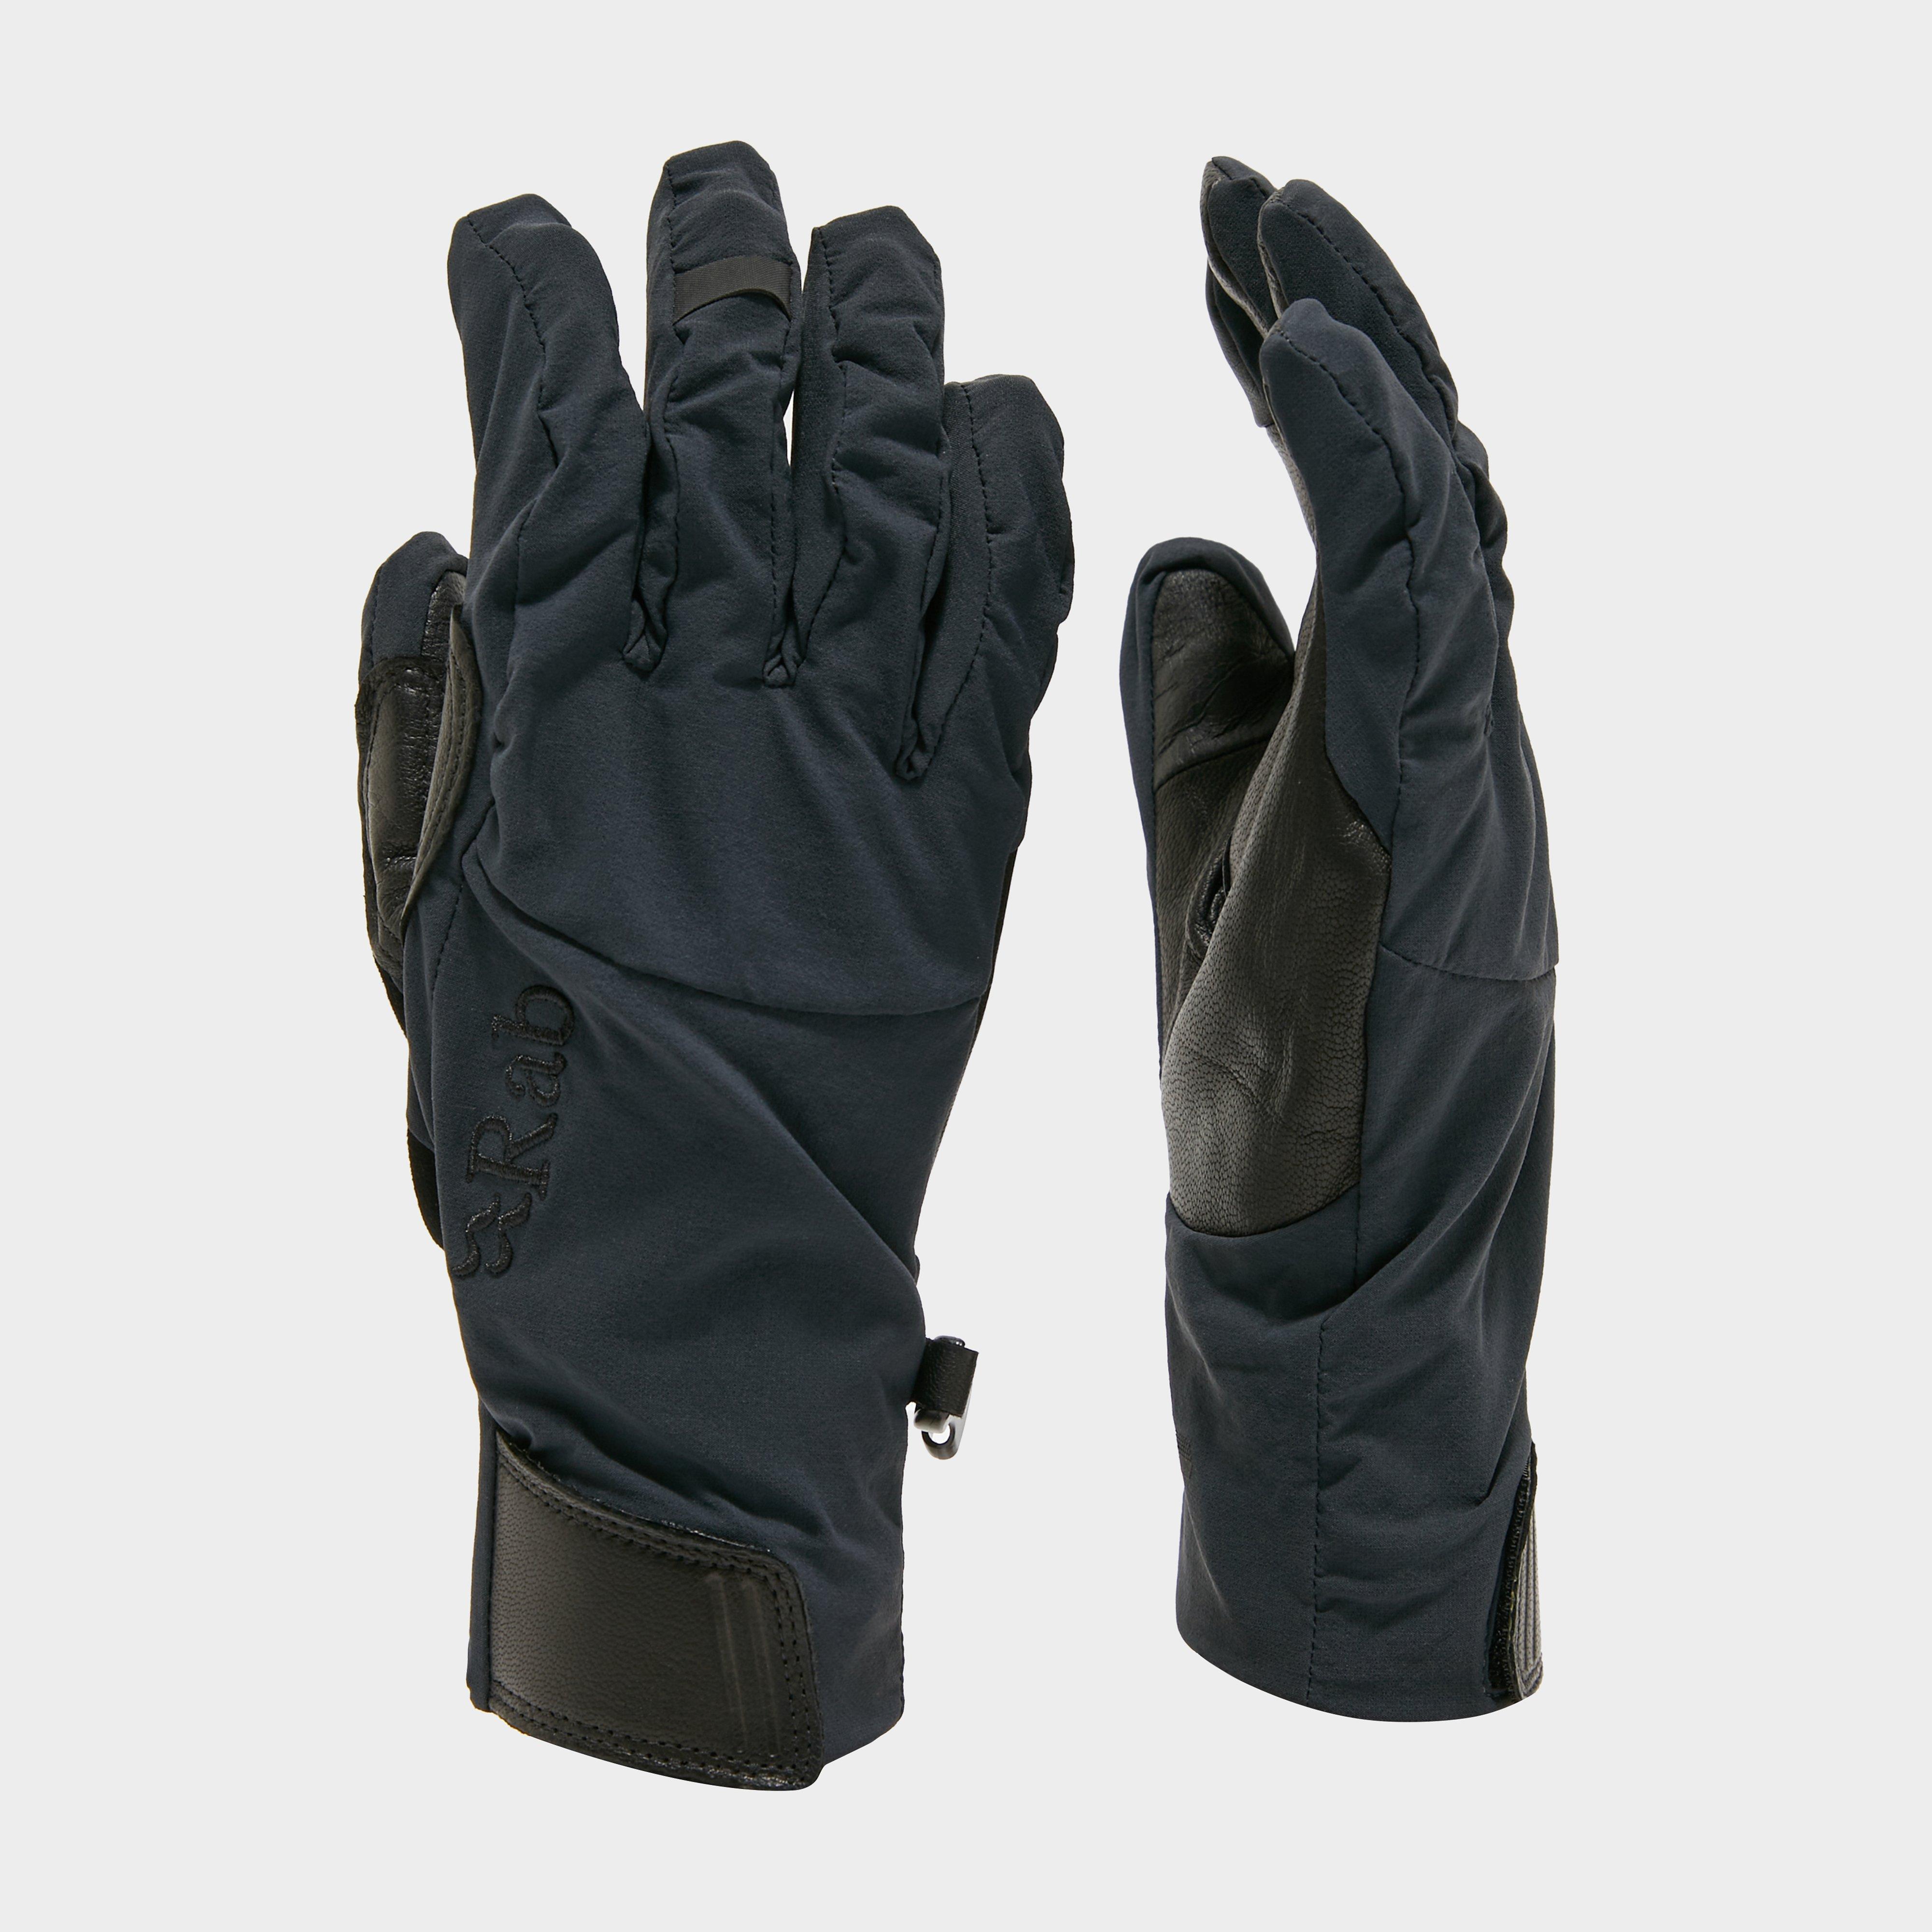 Image of Rab Vapour-Rise' Glove, GLOVE